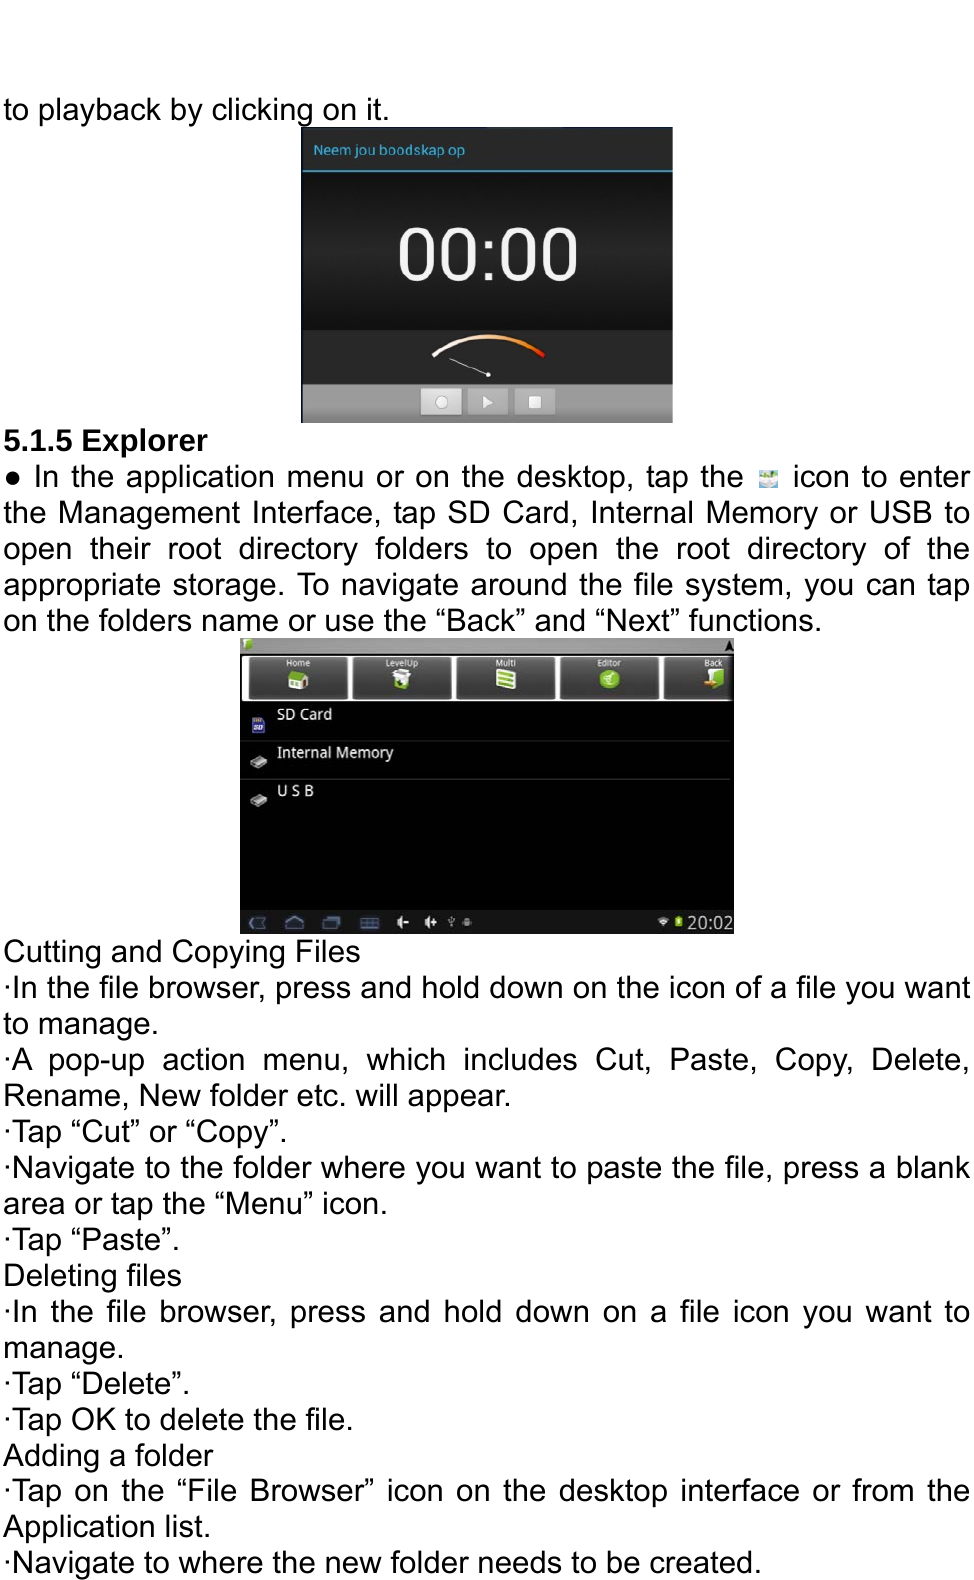   to playback by clicking on it.    5.1.5 Explorer   ● In the application menu or on the desktop, tap the    icon to enter the Management Interface, tap SD Card, Internal Memory or USB to open their root directory folders to open the root directory of the appropriate storage. To navigate around the file system, you can tap on the folders name or use the “Back” and “Next” functions.    Cutting and Copying Files ·In the file browser, press and hold down on the icon of a file you want to manage.   ·A pop-up action menu, which includes Cut, Paste, Copy, Delete, Rename, New folder etc. will appear.   ·Tap “Cut” or “Copy”.   ·Navigate to the folder where you want to paste the file, press a blank area or tap the “Menu” icon.   ·Tap “Paste”.   Deleting files ·In the file browser, press and hold down on a file icon you want to manage.  ·Tap “Delete”. ·Tap OK to delete the file.   Adding a folder ·Tap on the “File Browser” icon on the desktop interface or from the Application list.   ·Navigate to where the new folder needs to be created.   